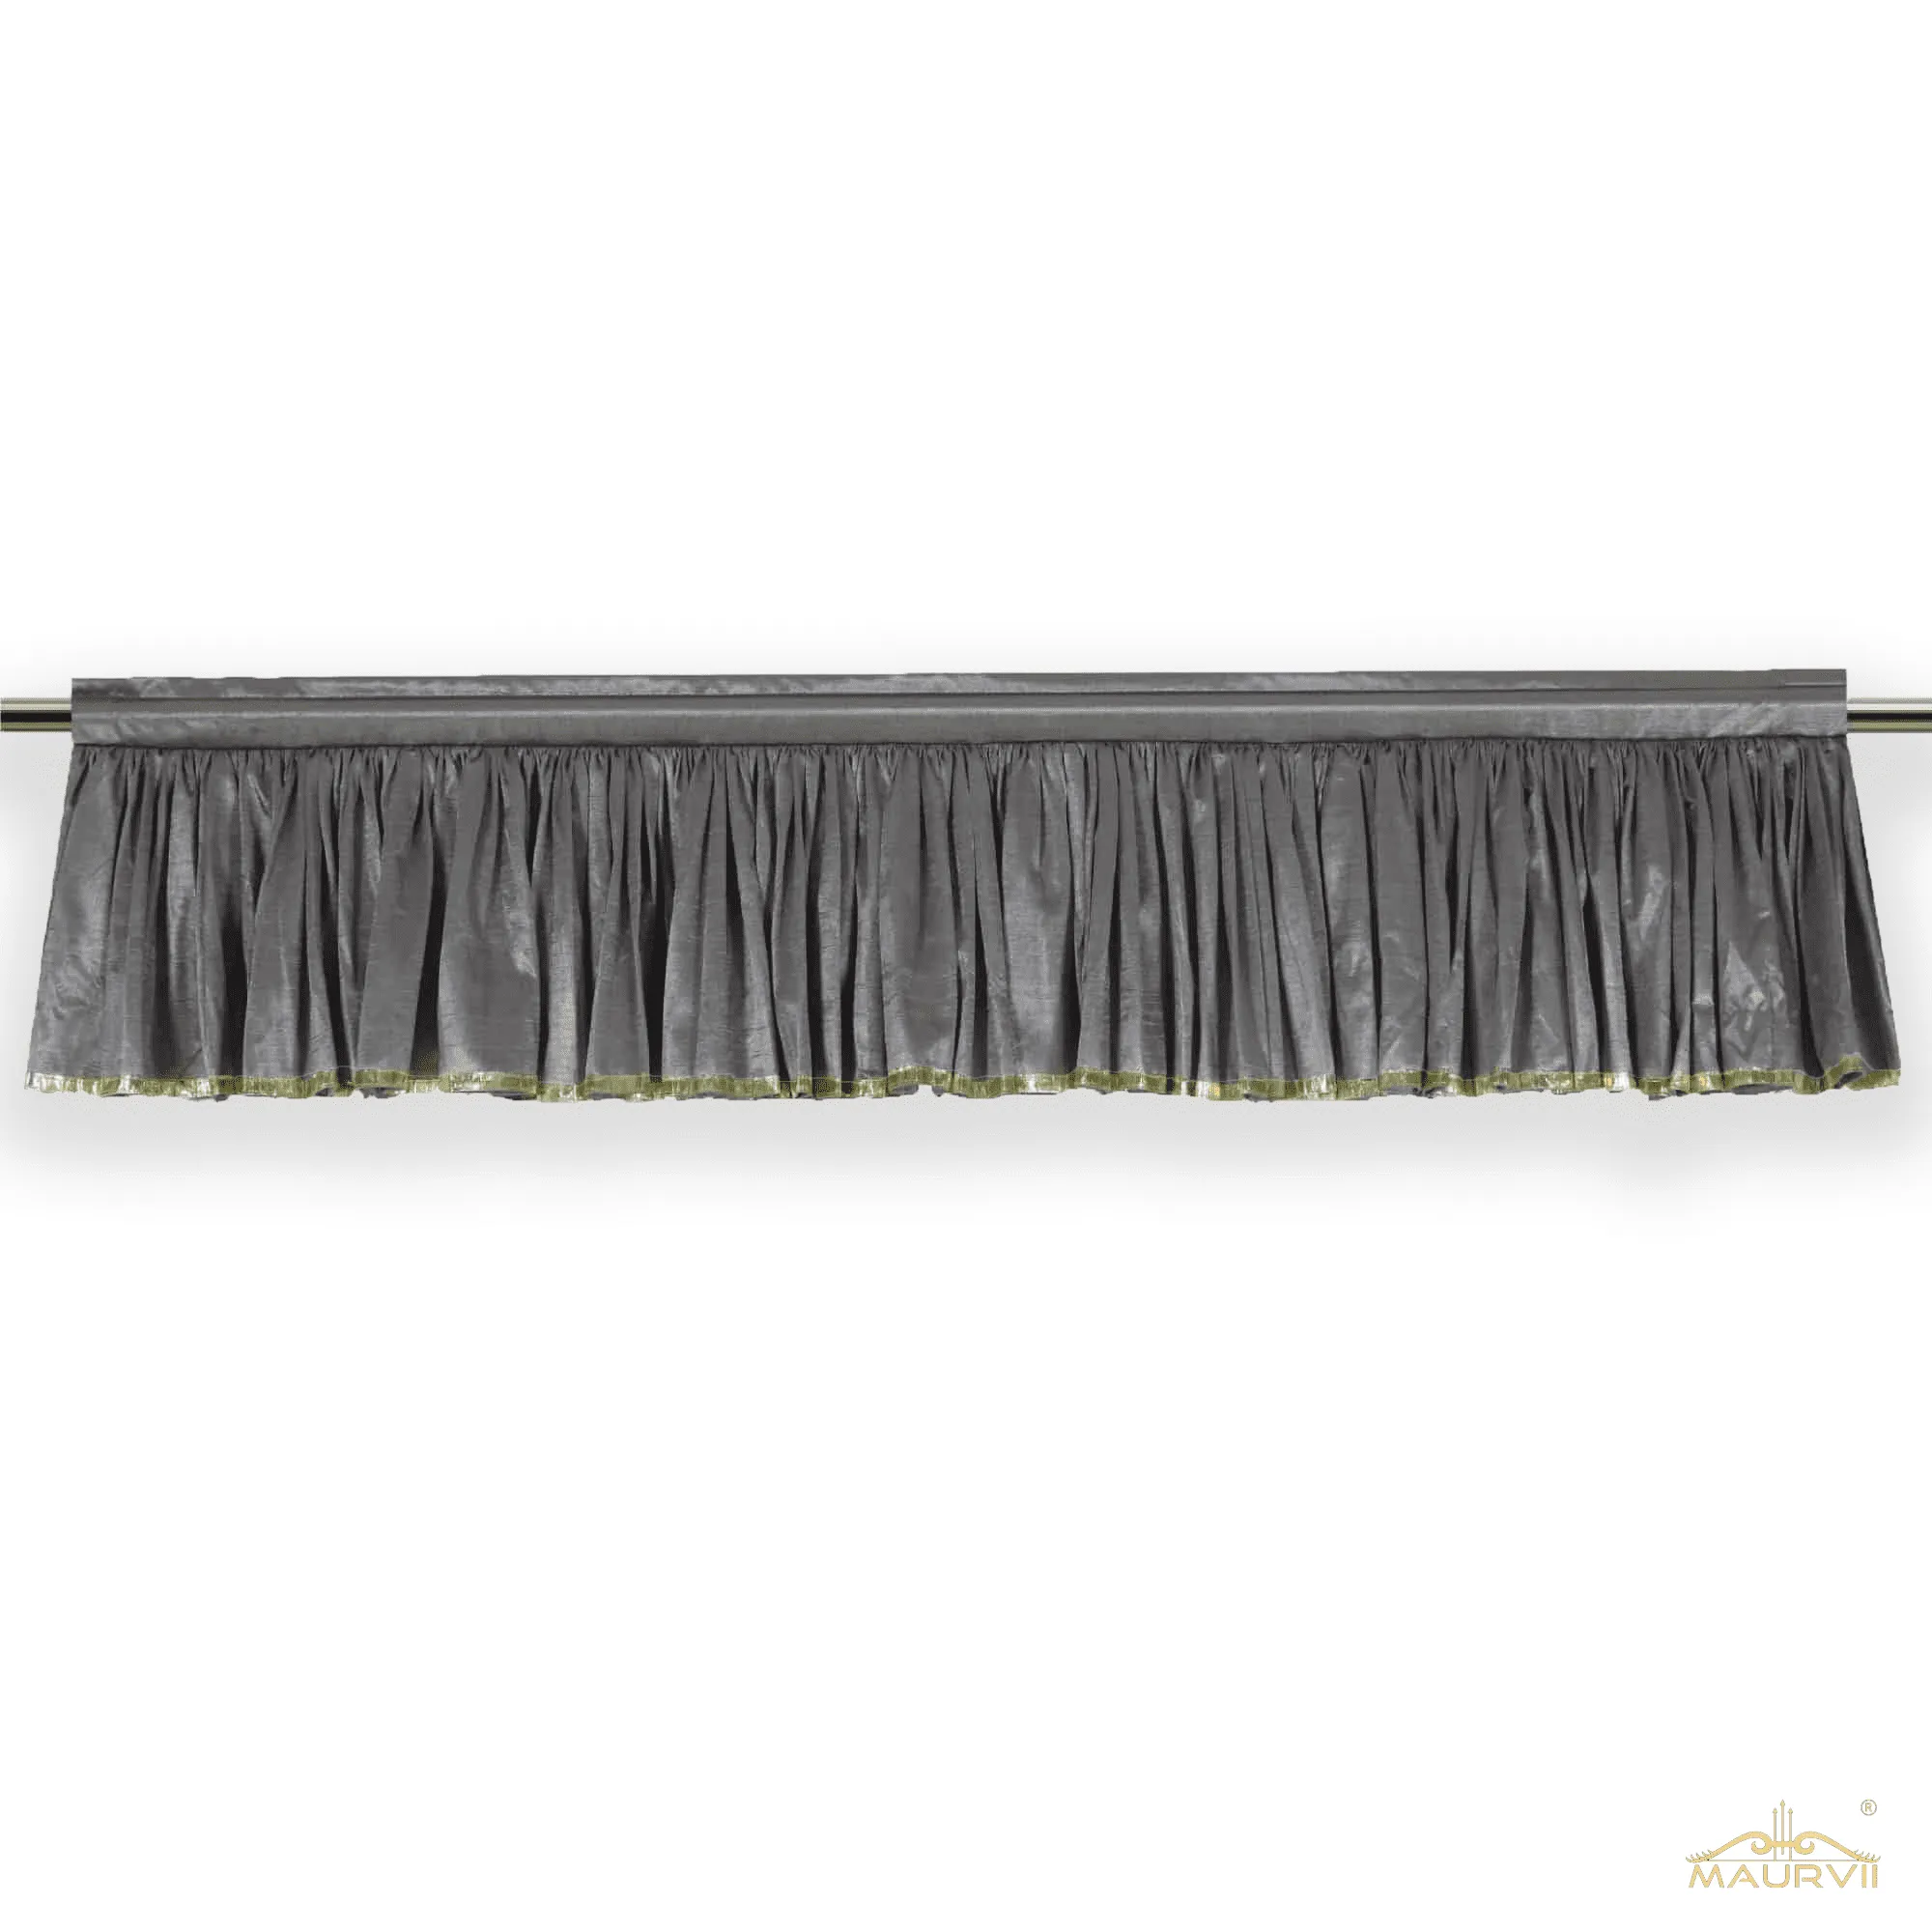 Grey Pleated Valance installed with curtain rod